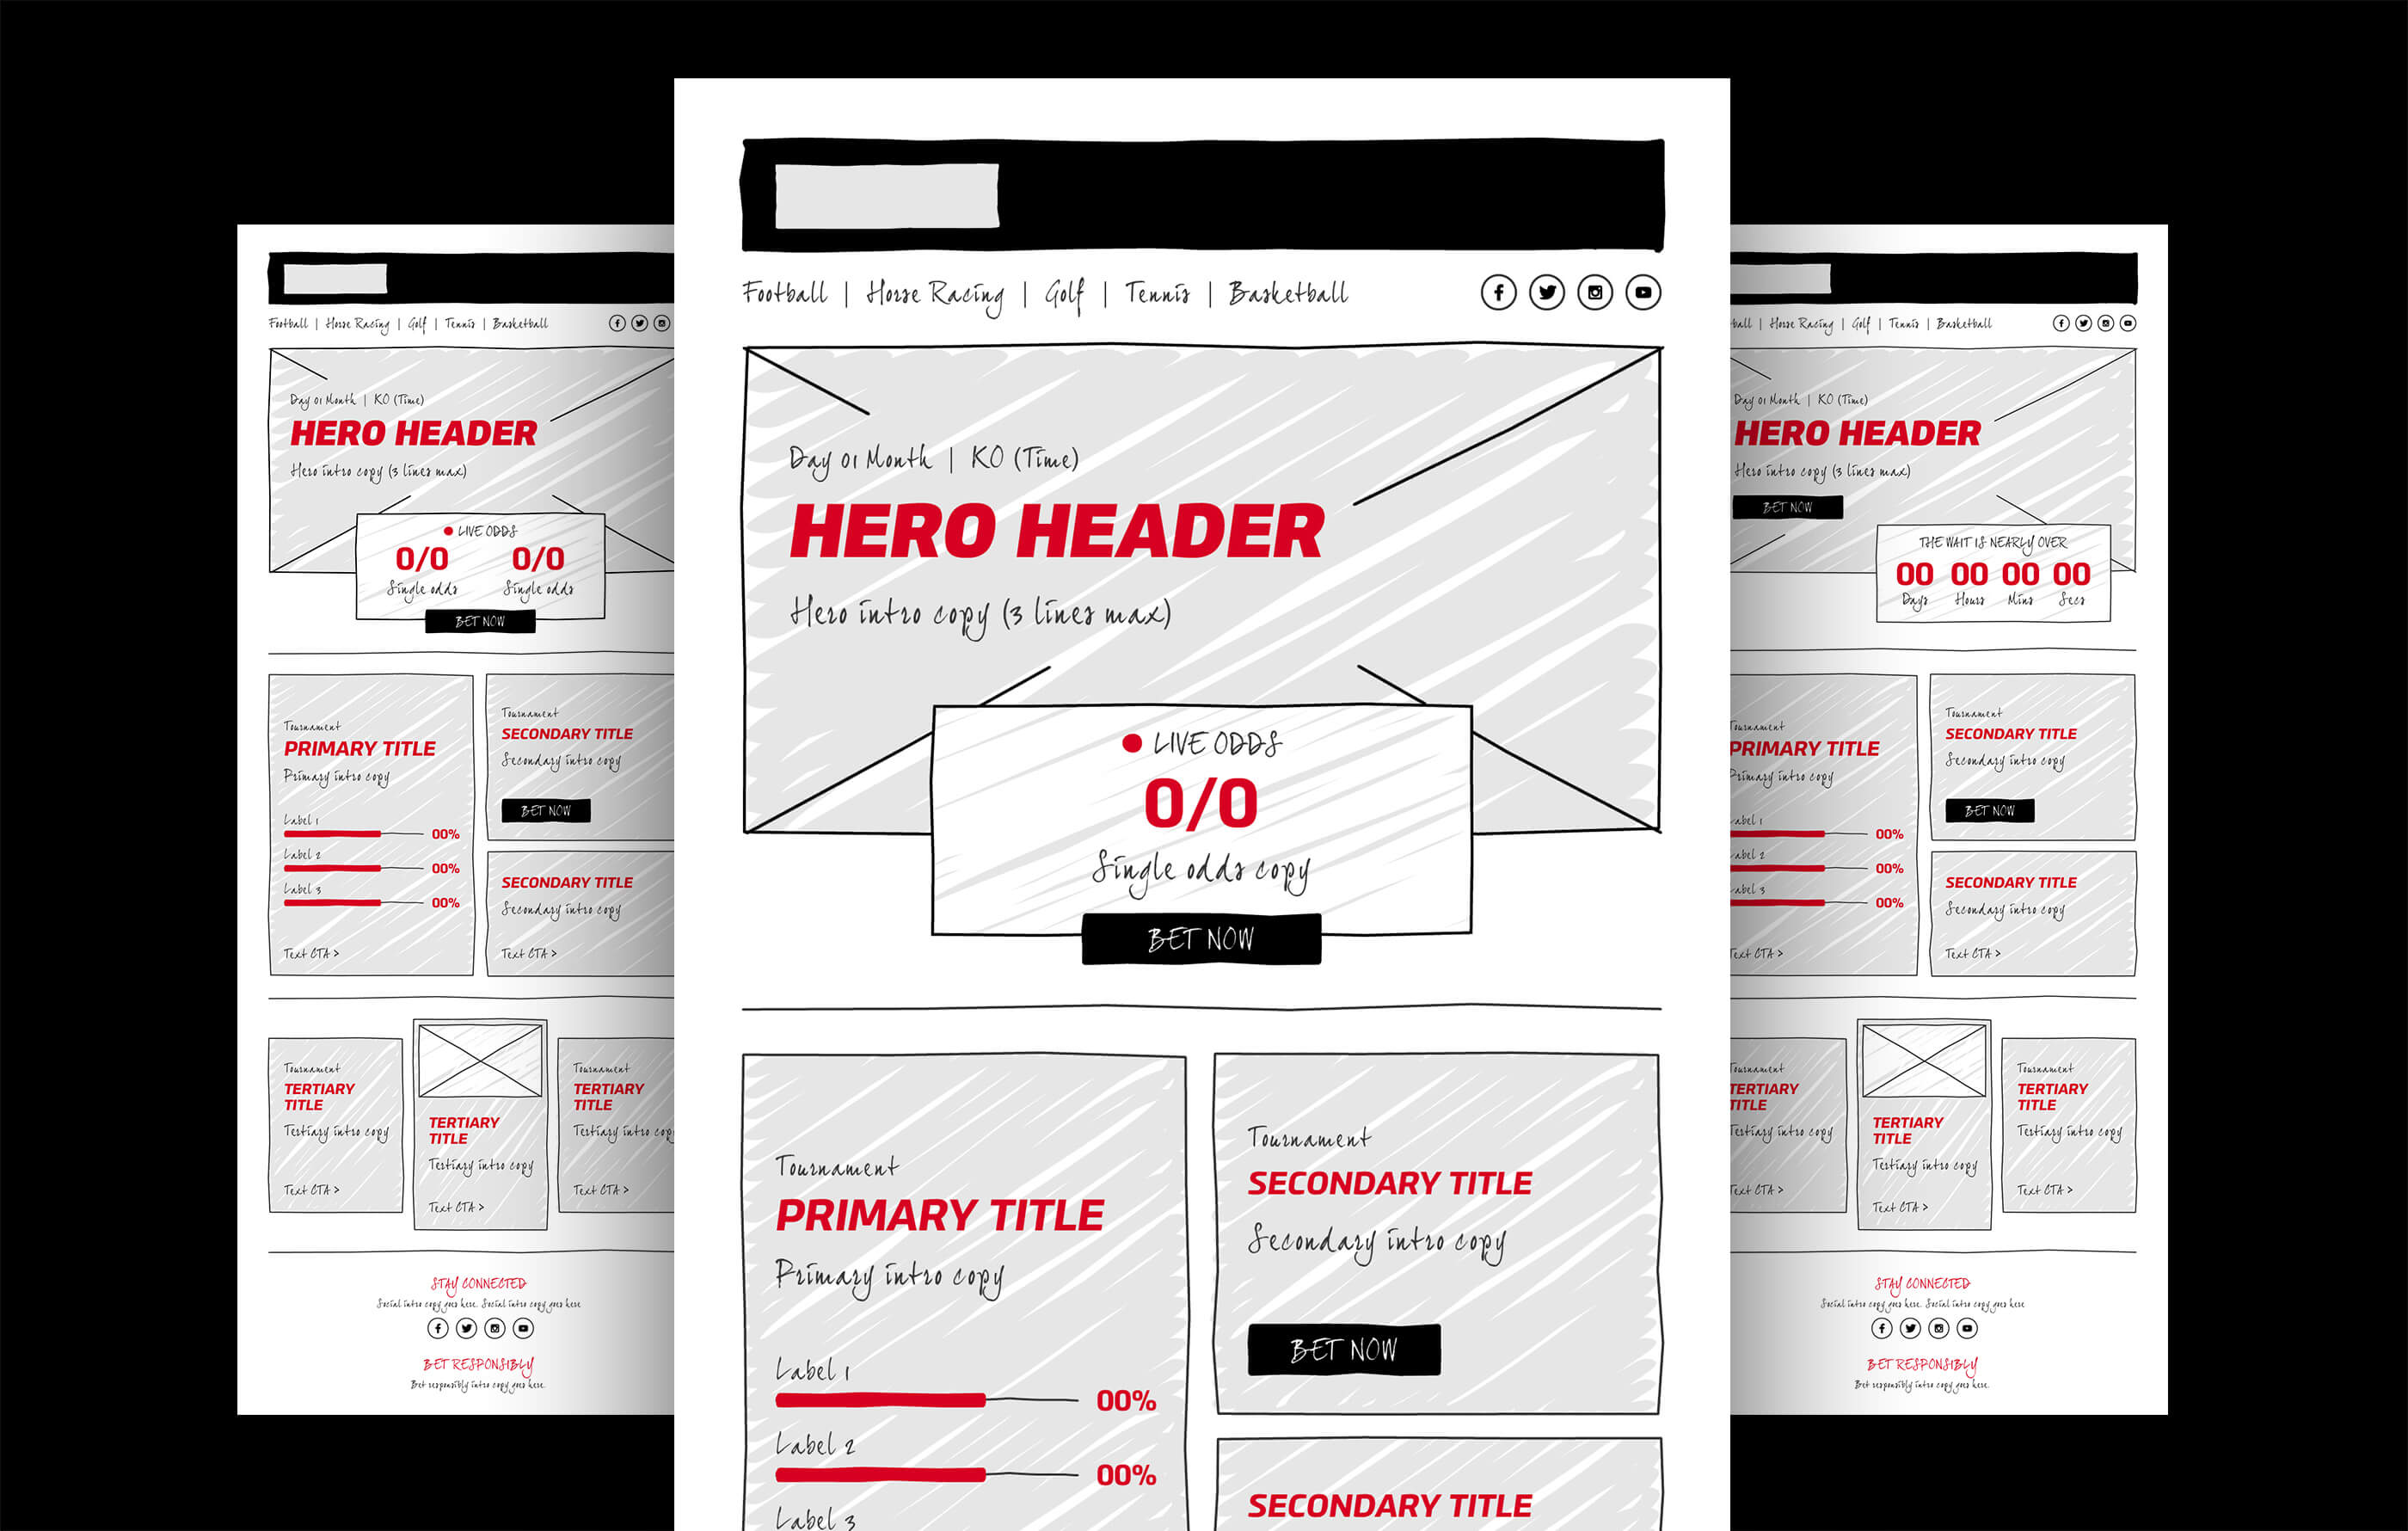 BetStars mailer wireframes for a sports eShot, featuring live odds and football articles